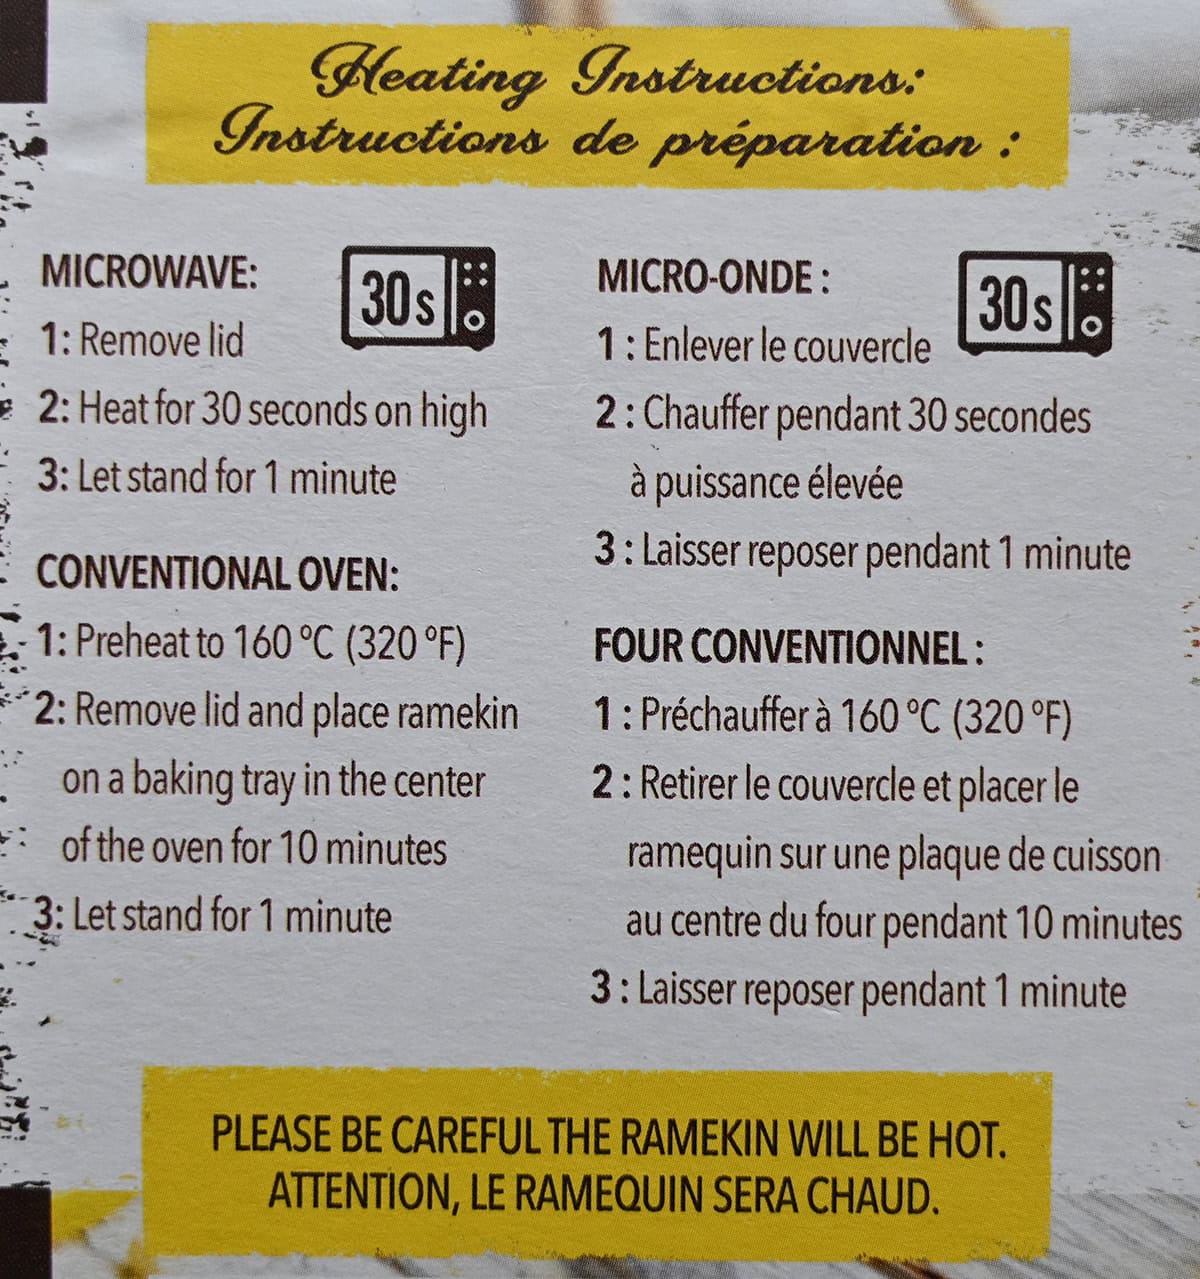 Image of the heating instructions for the pie from the back of the box.